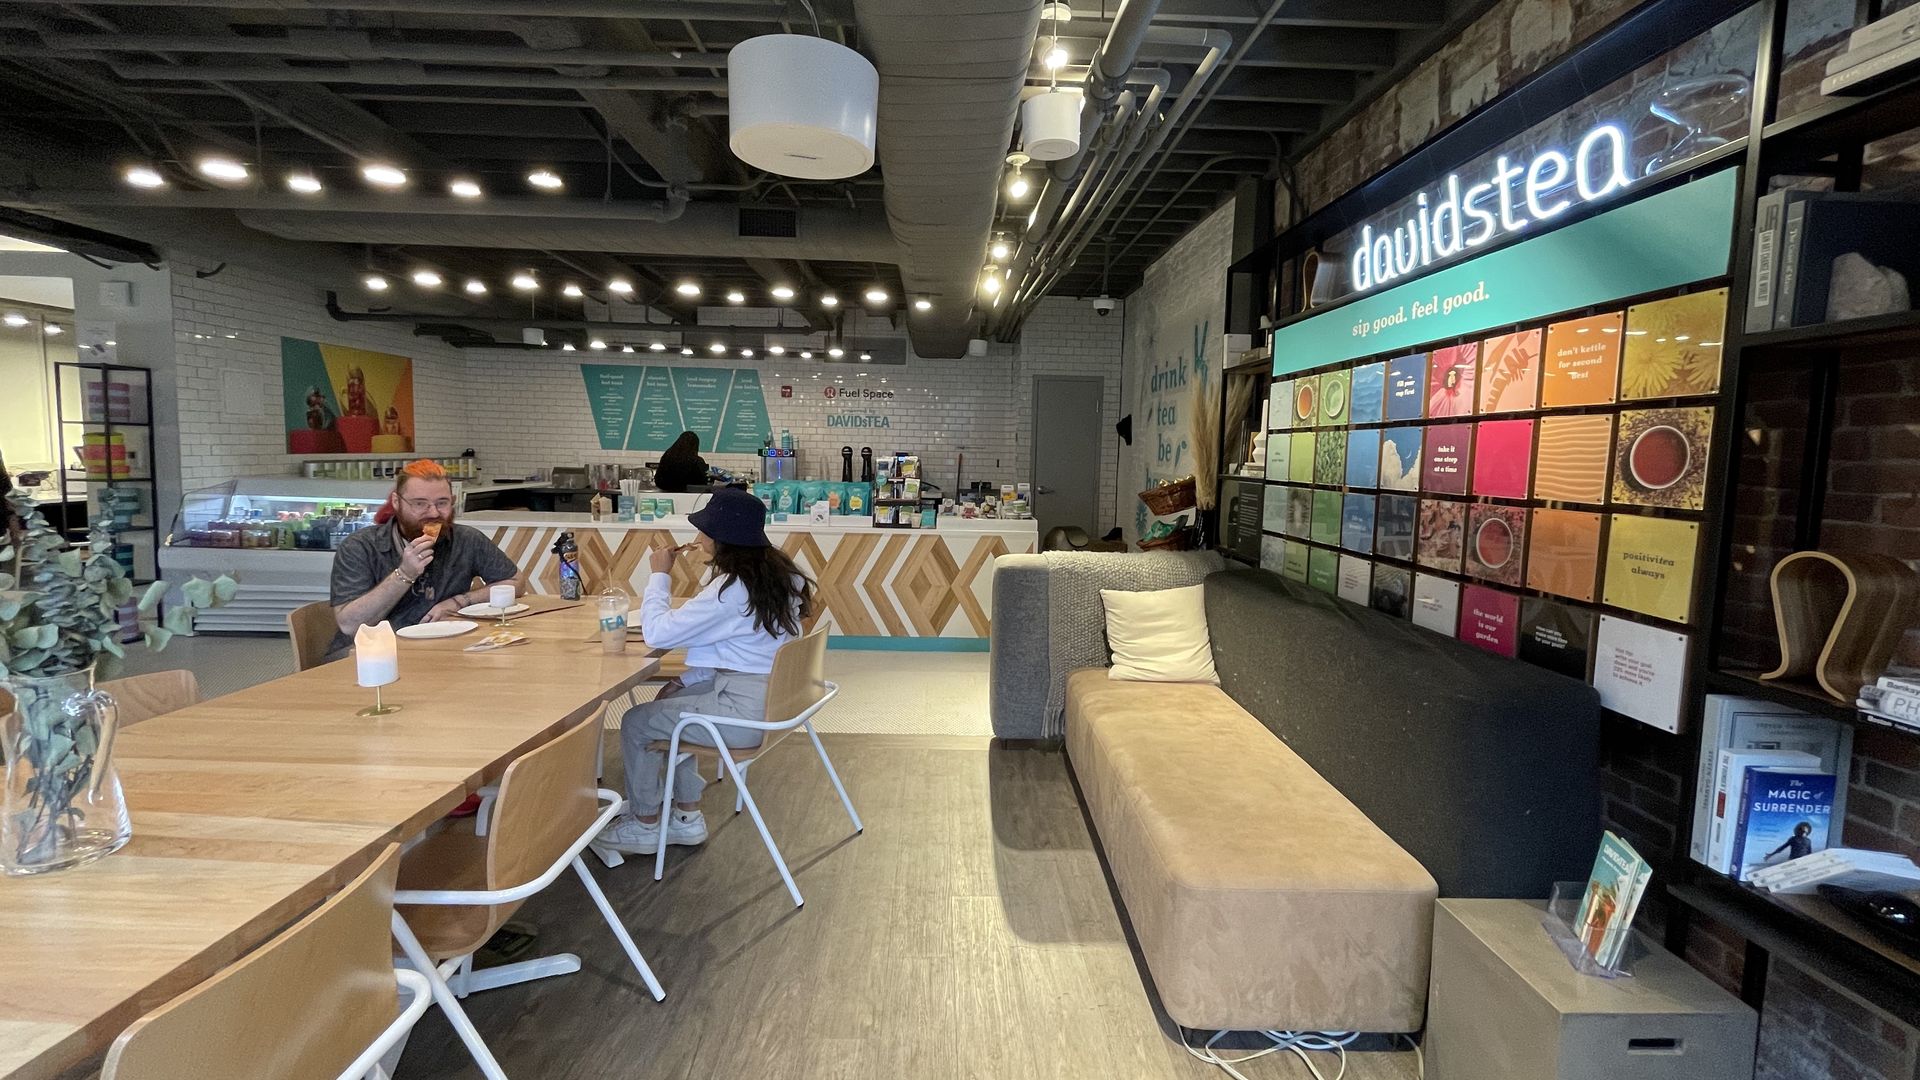 Two people sit at a long table inside a DavidsTea pop-up location, located on the second floor above the Lululemon on Newbury Street.